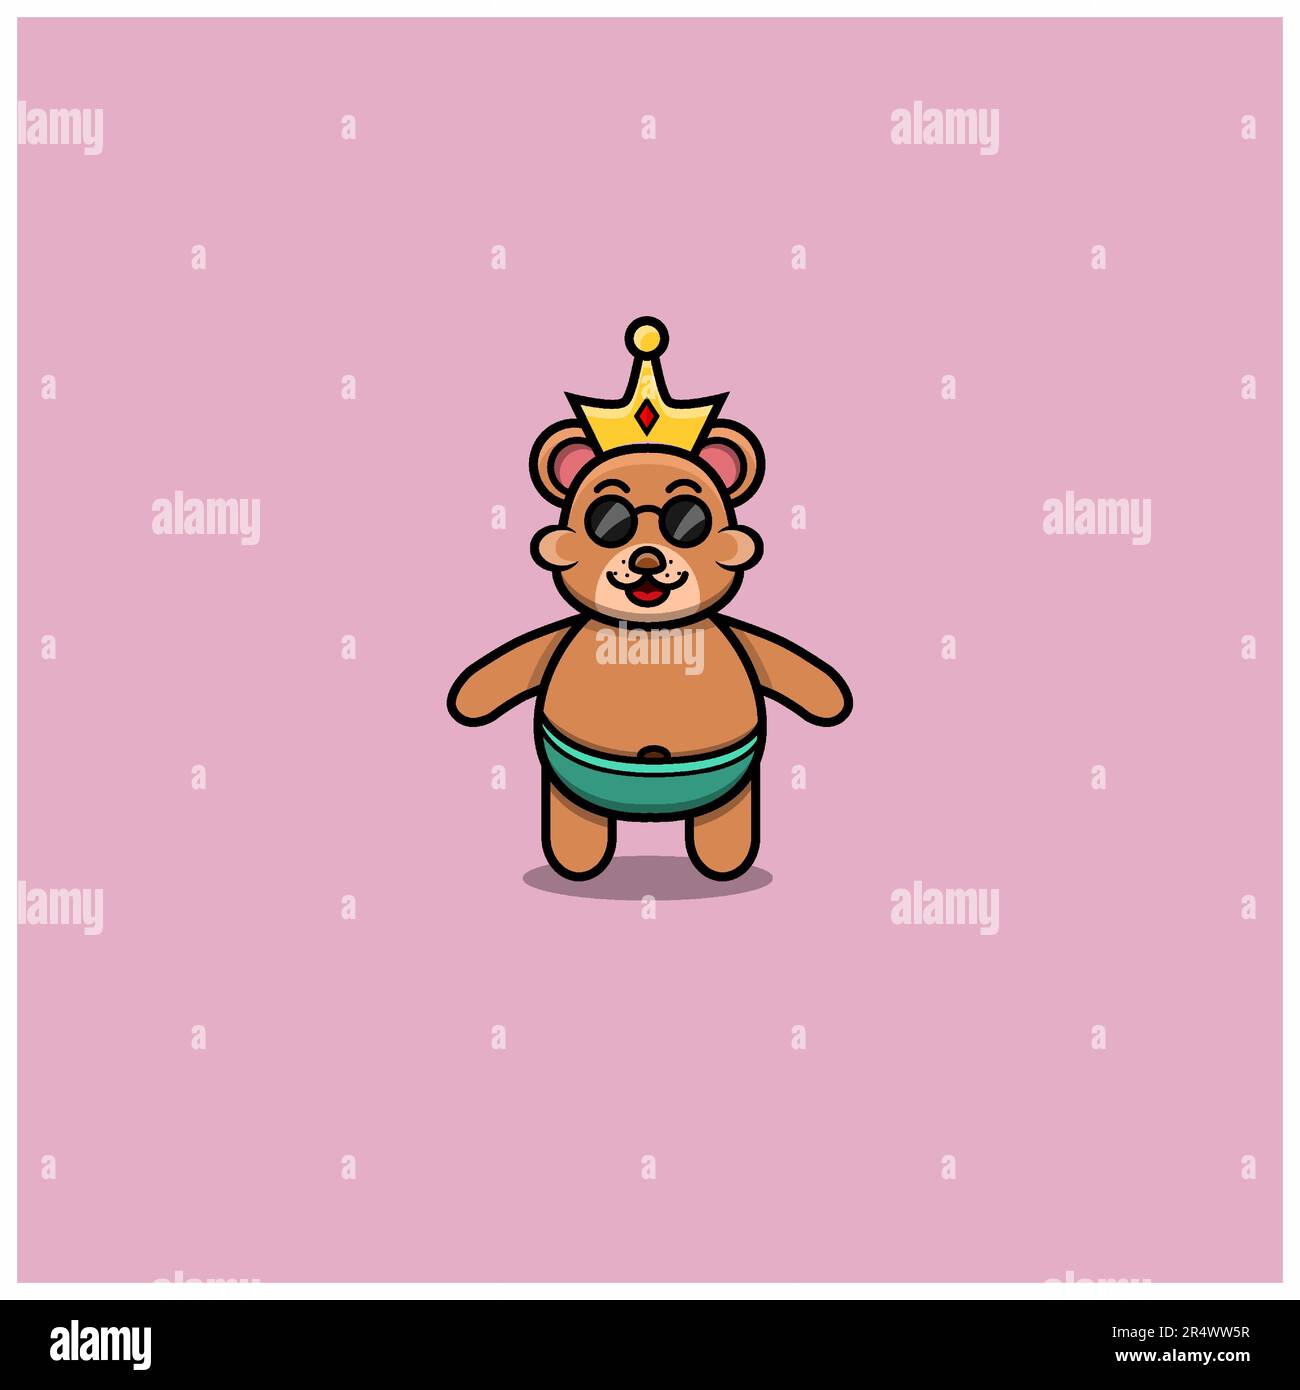 Cute Cool Baby Bear With Crown. Character, Logo, Icon, Cartoon And Inspiration Design. Vector And Illustration. Stock Vector